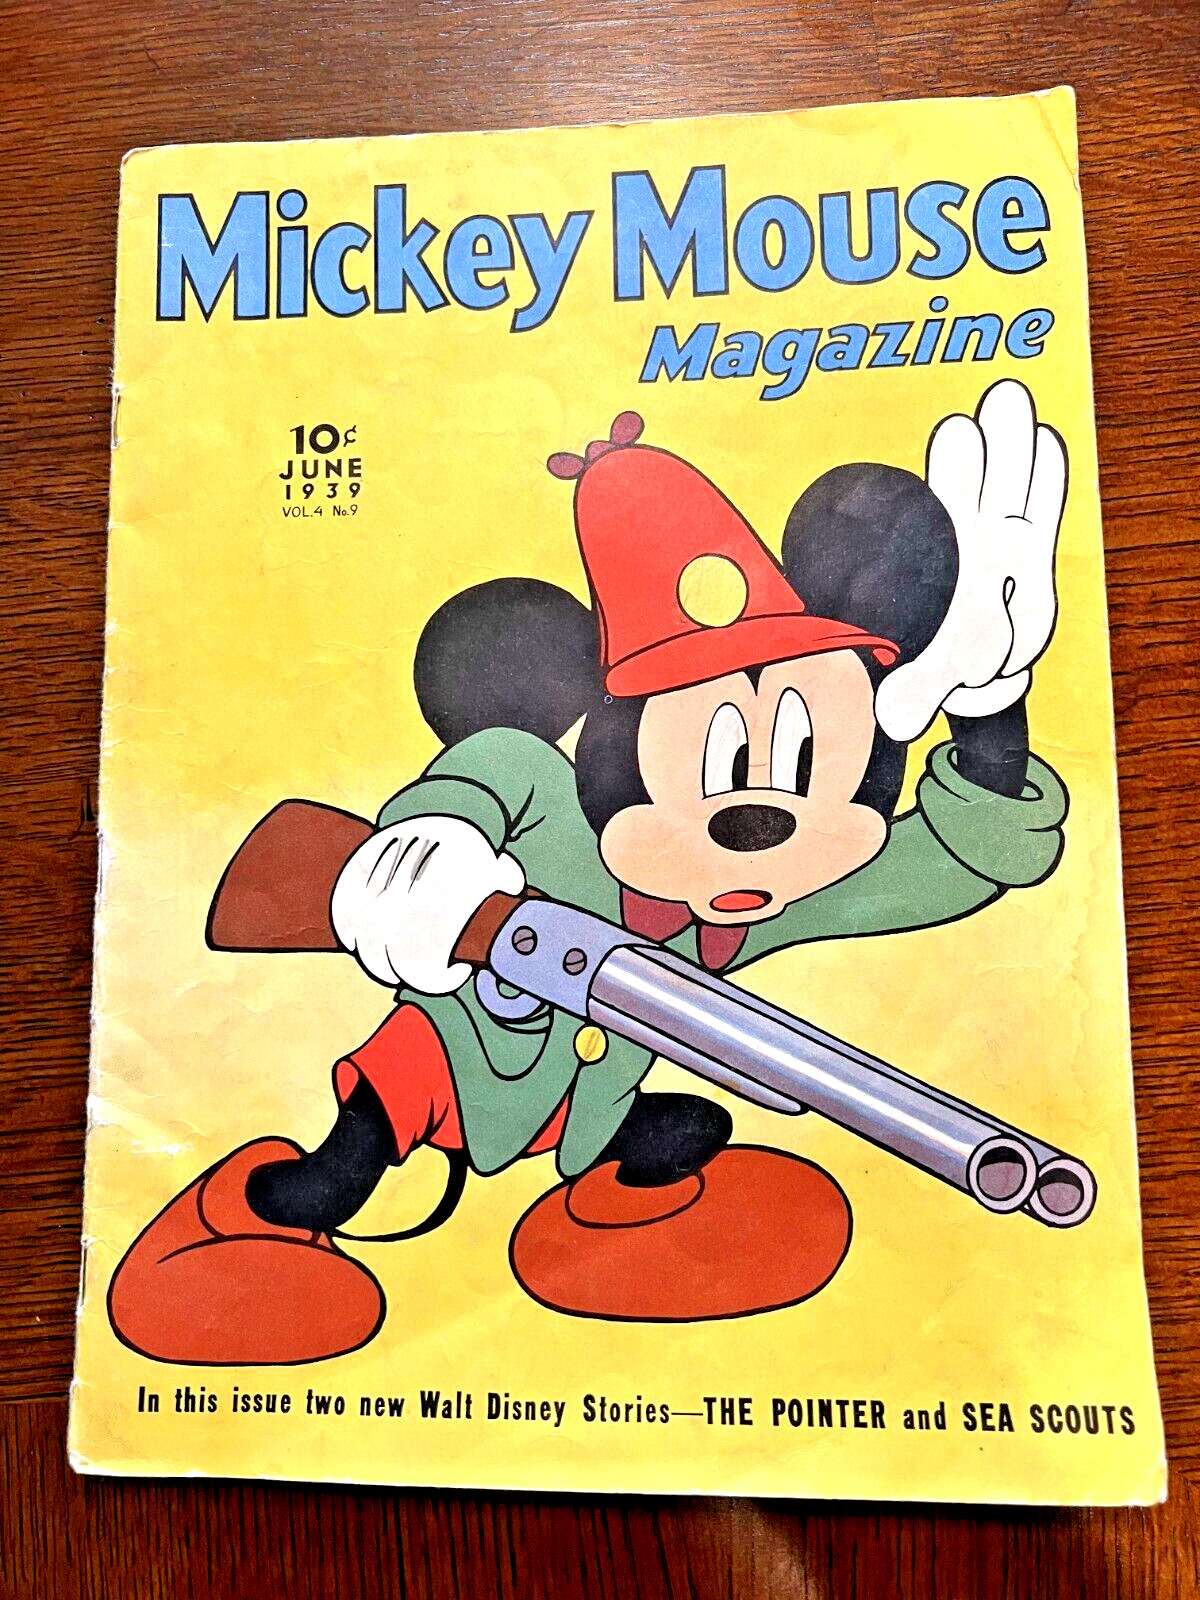 Mickey Mouse Magazine 1939 Vol. 4 #9 Very Good Condition